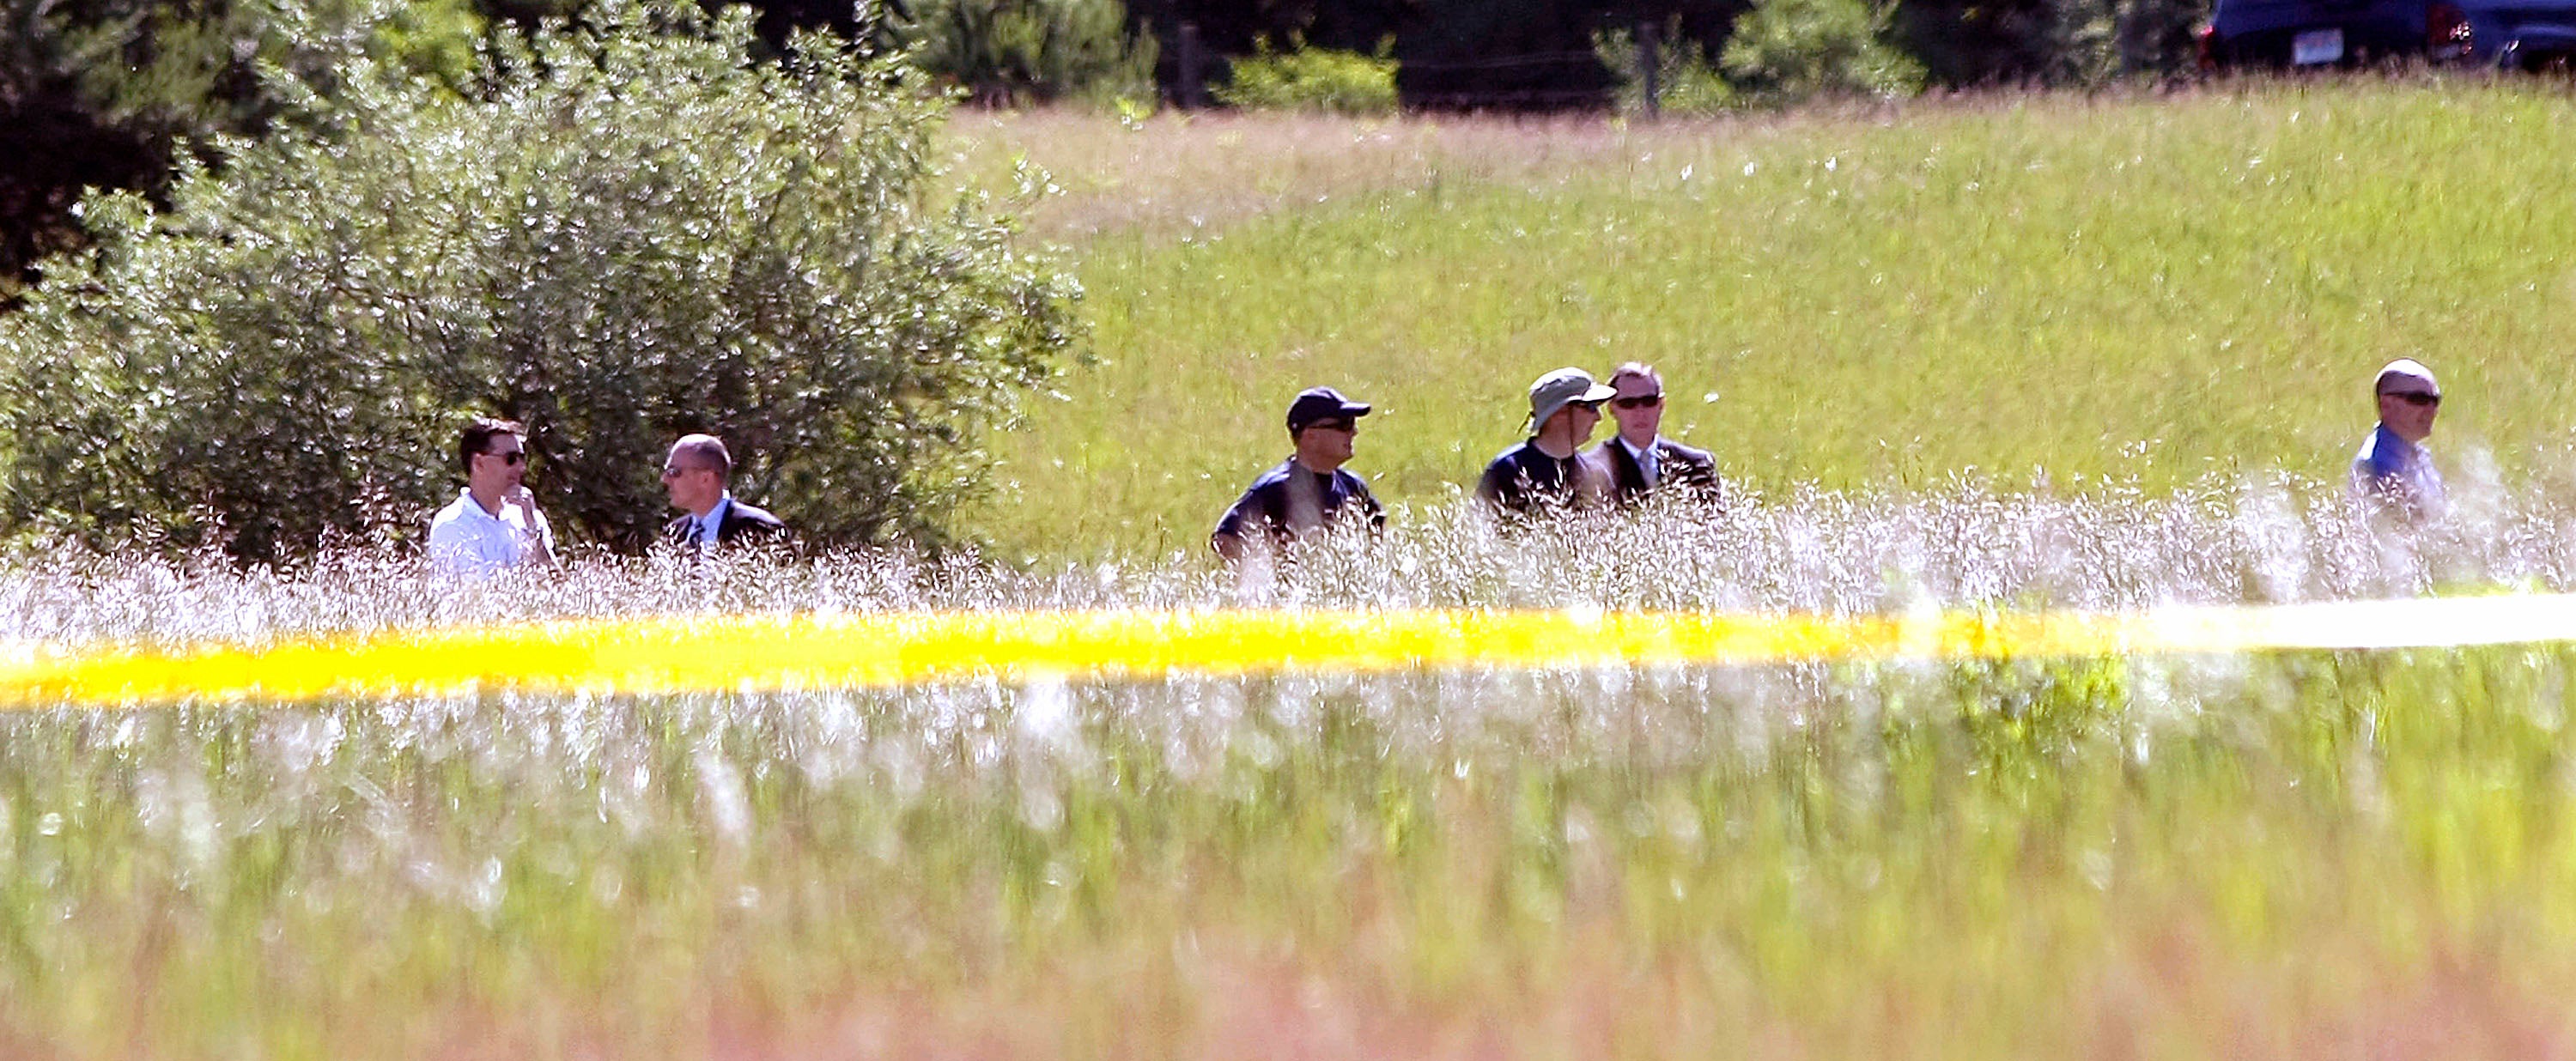 FBI agents search a field outside Detroit for former Teamsters boss’s remains